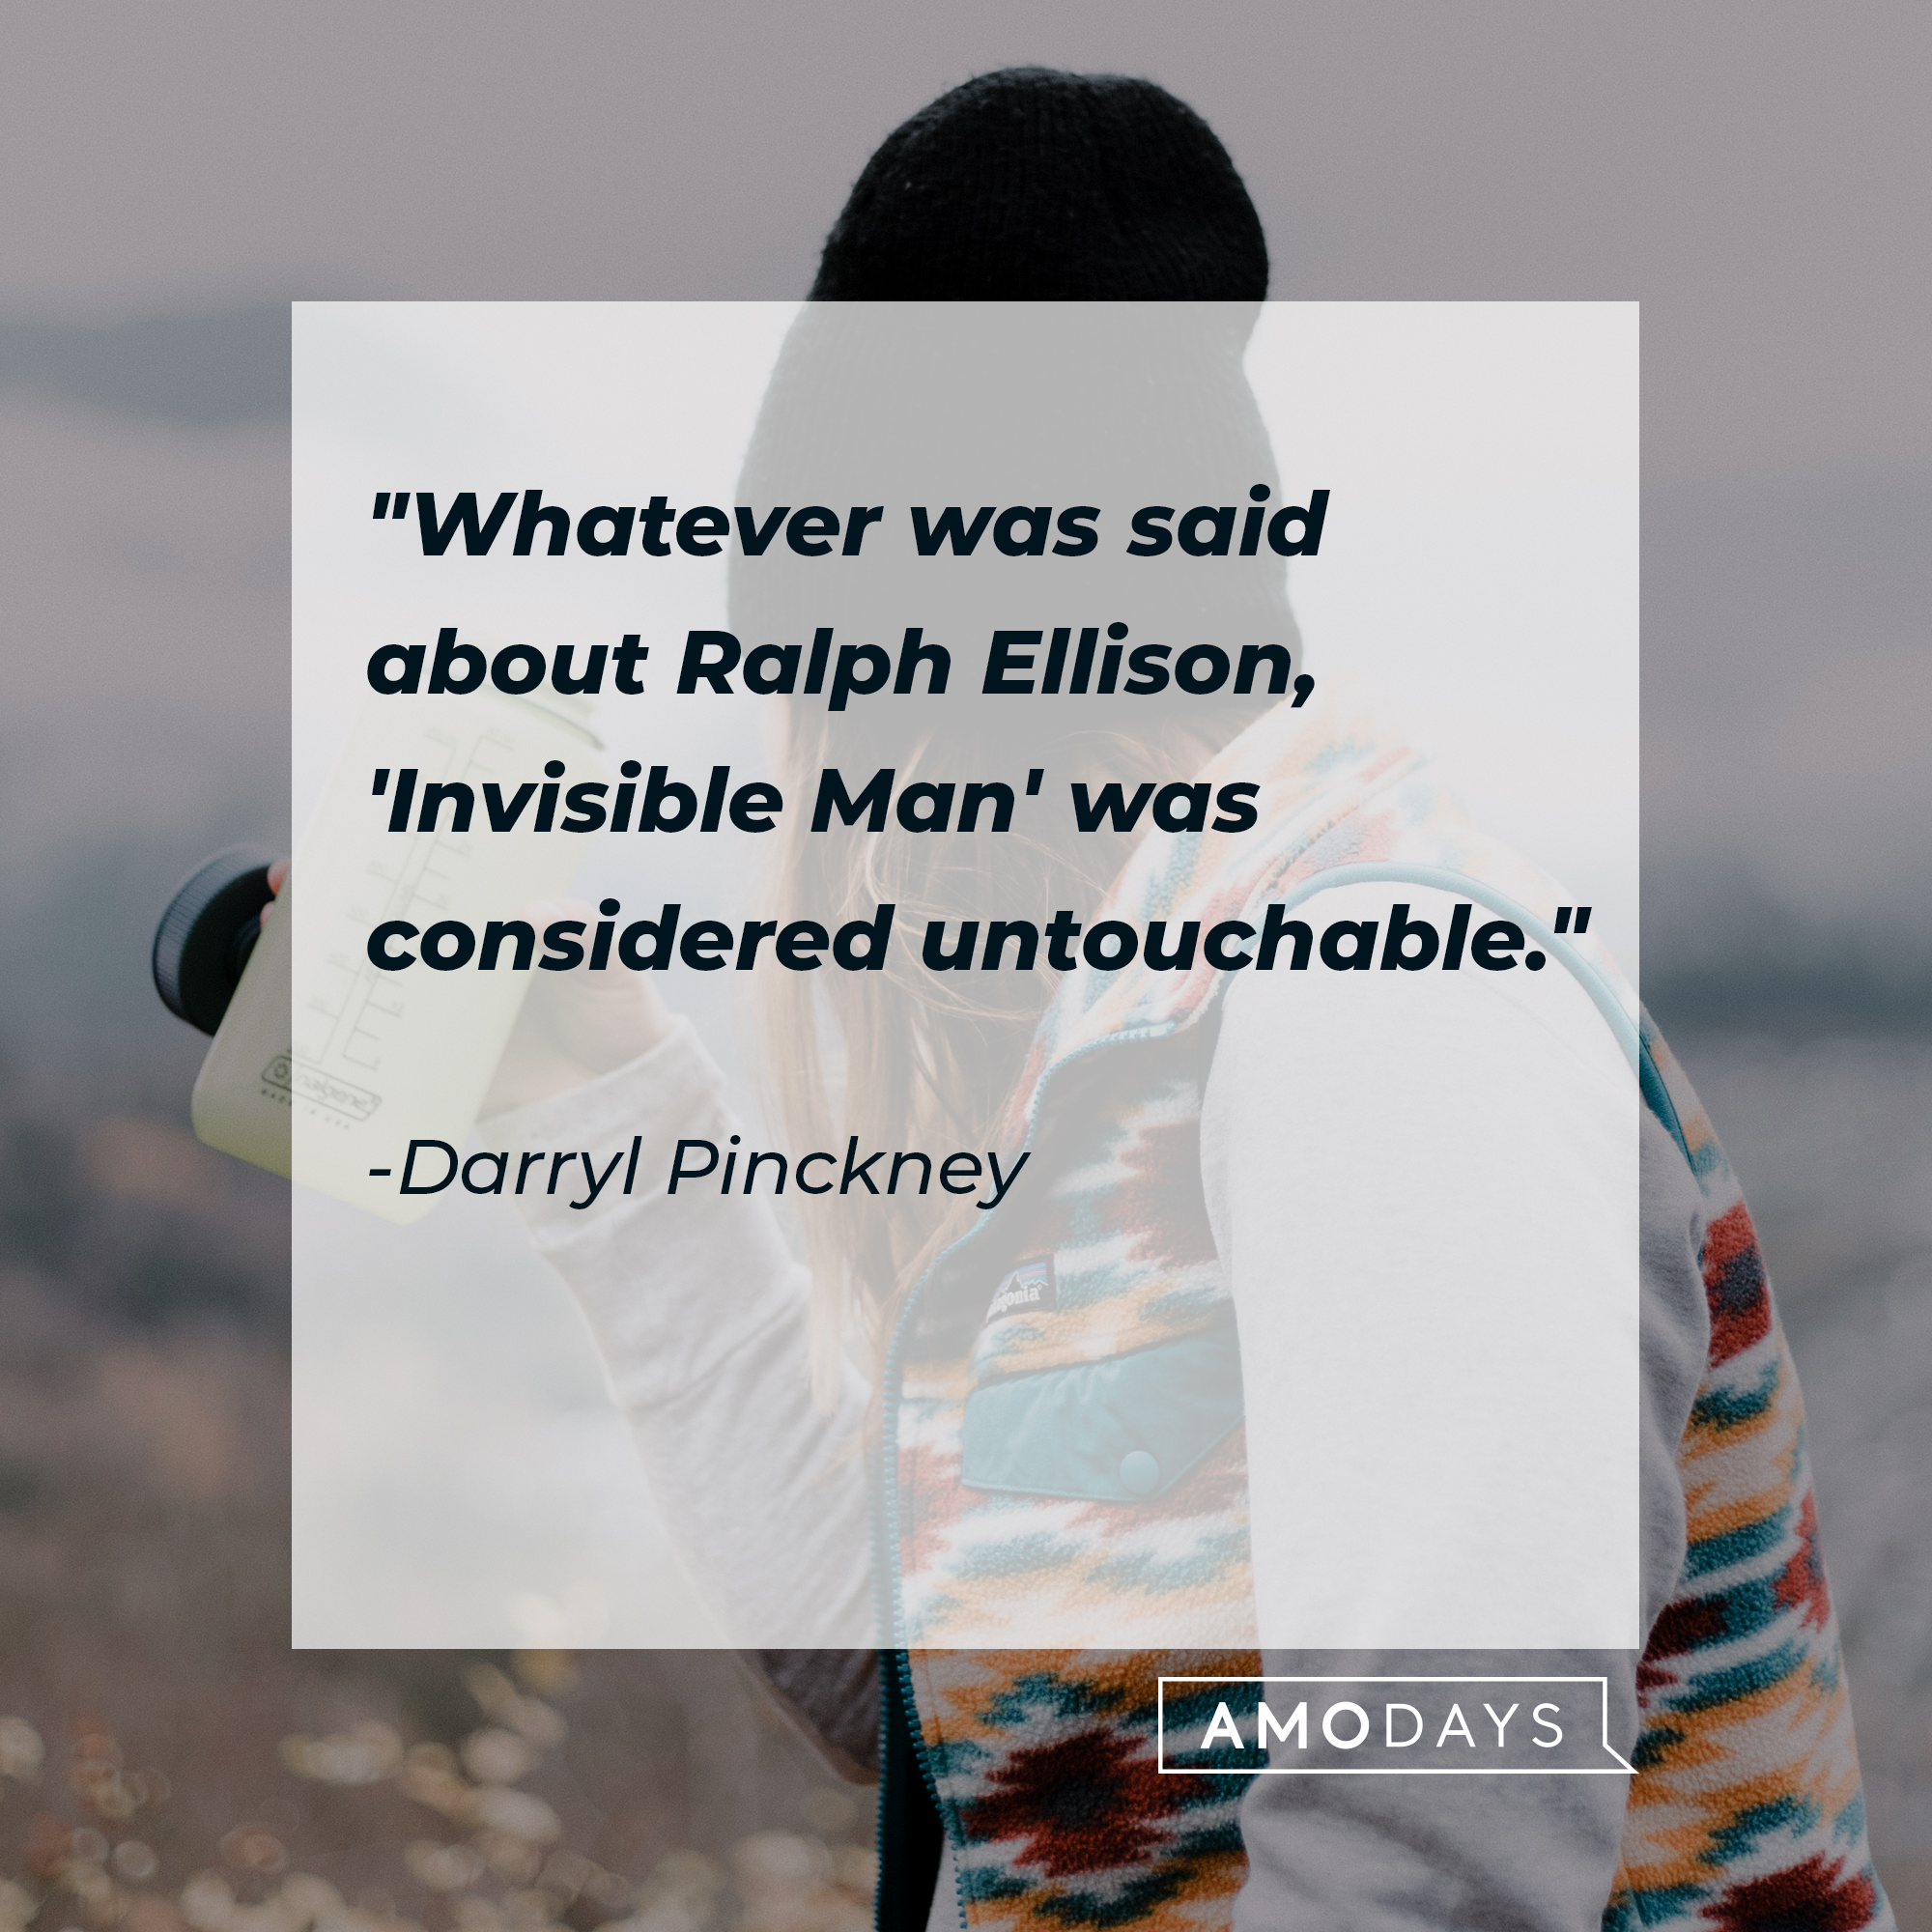 Darryl Pinckney's quote: "Whatever was said about Ralph Ellison, 'Invisible Man' was considered untouchable." | Source: Unsplash